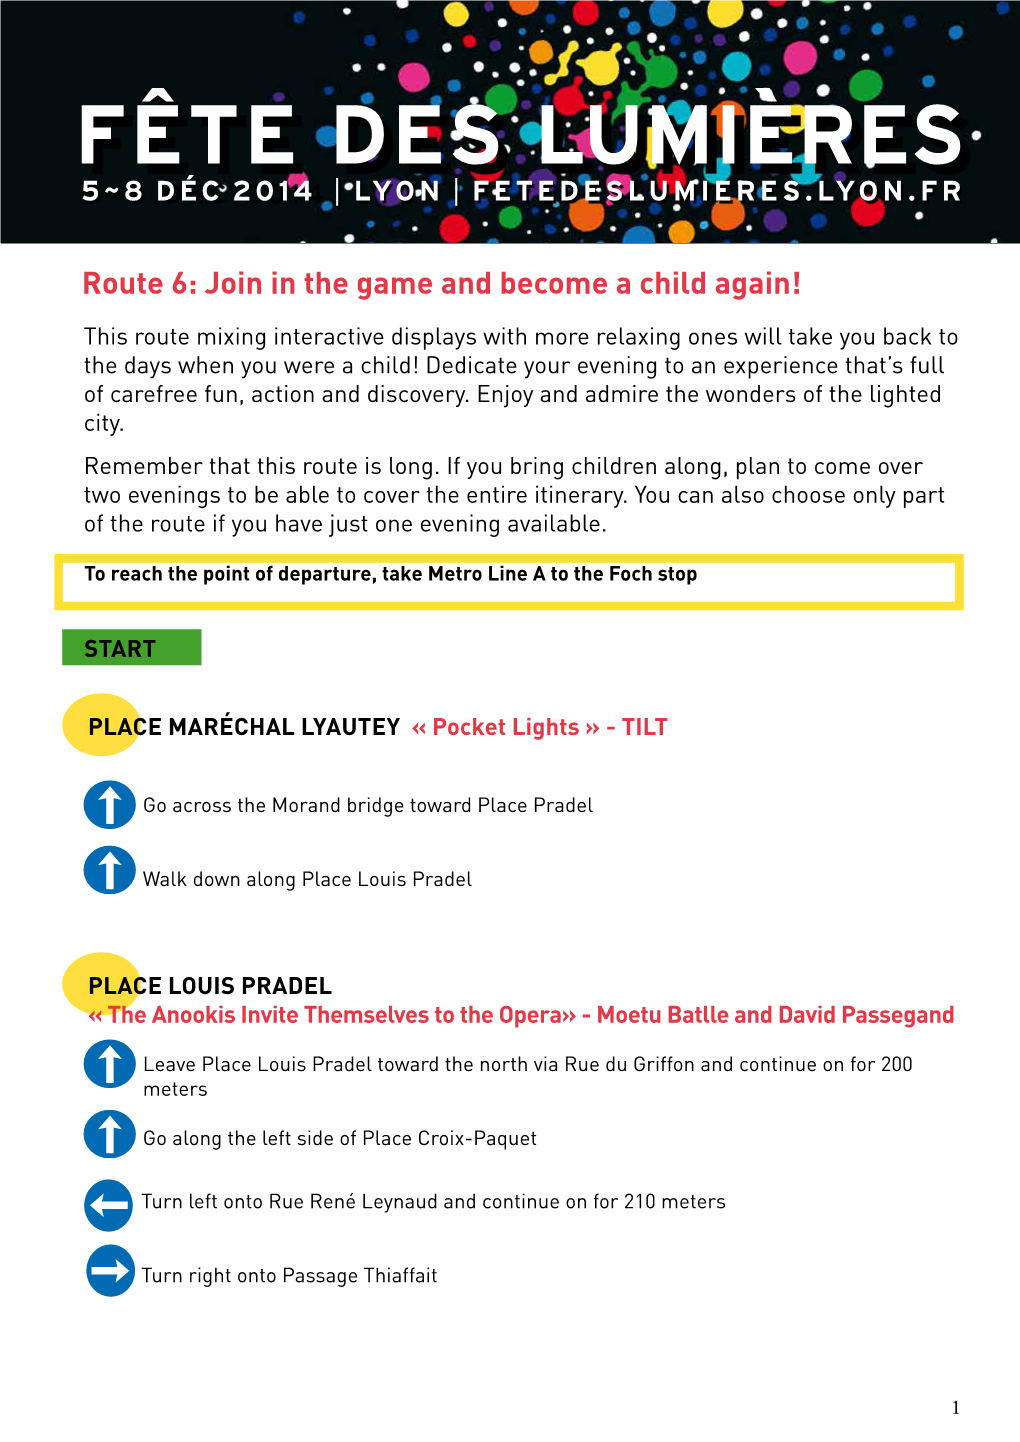 Route 6: Join in the Game and Become a Child Again!